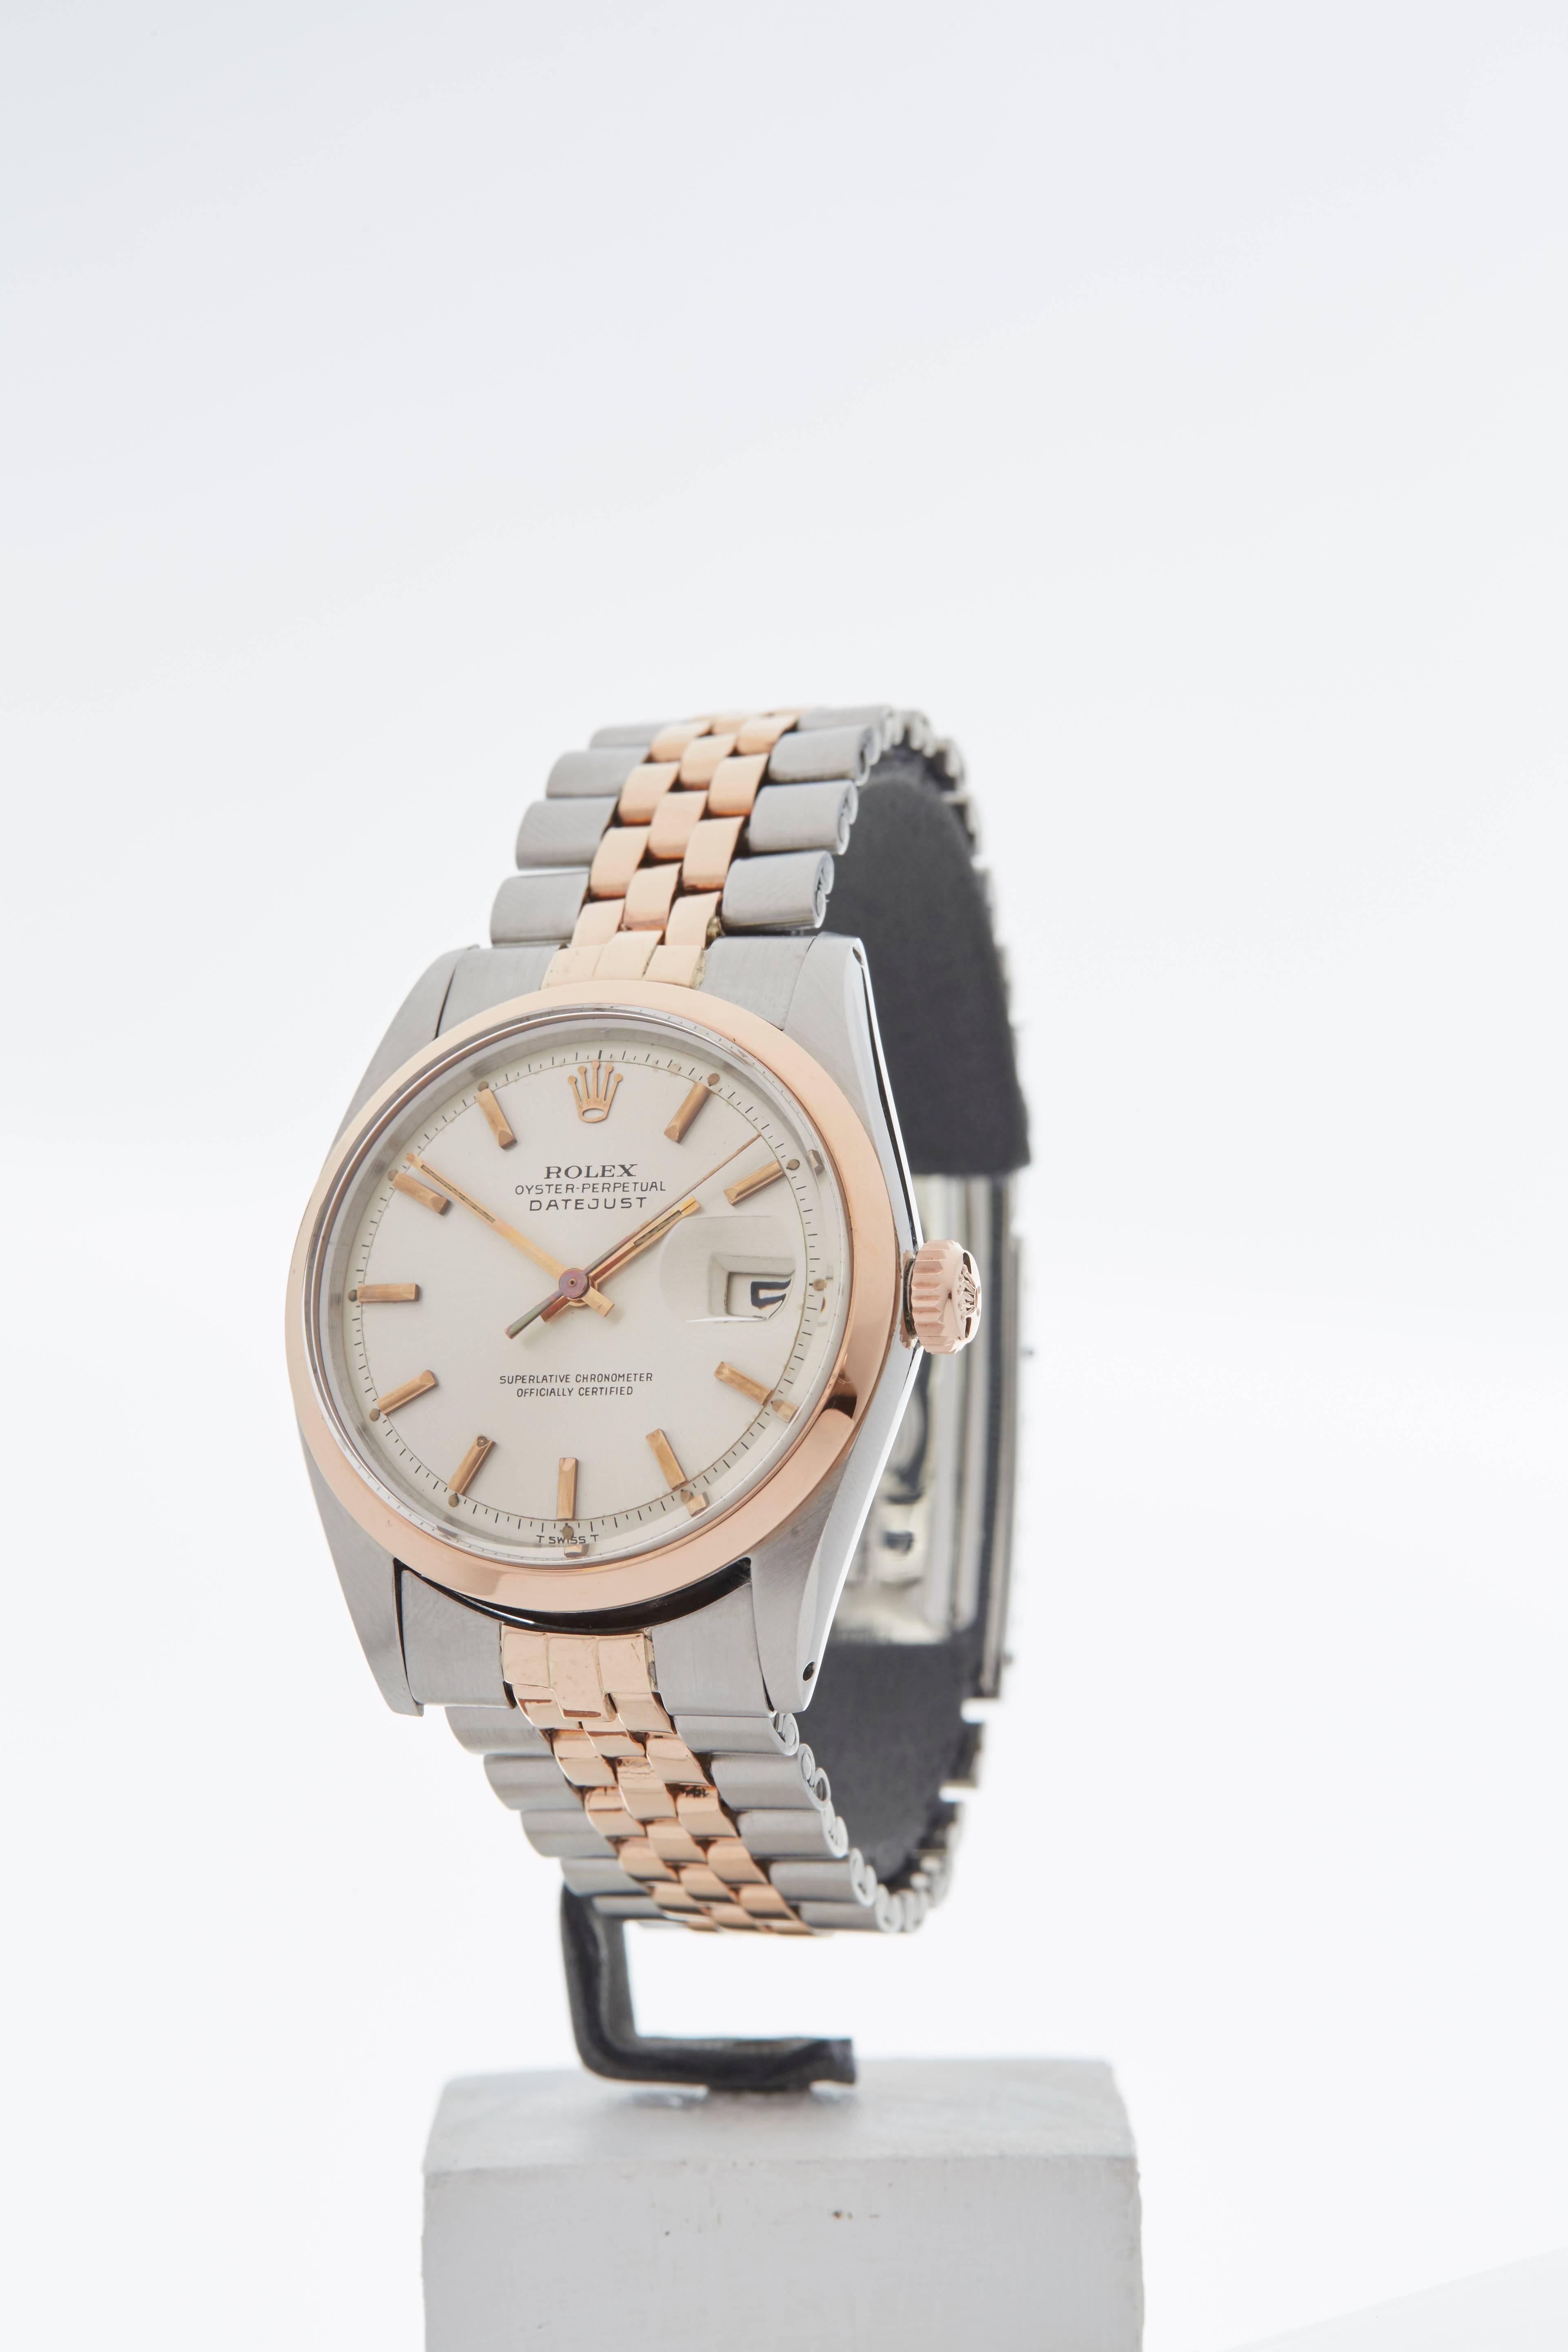 Ref: W4079
Model Number: 1600
Serial Number: 109****
Condition: 8 - Good condition
Gender: Gents
Age: 1965
Case Diameter: 36 mm
Case Size: 36mm
Box And Papers: Box Only
Movement: Automatic
Case: Stainless Steel & 18k Rose Gold
Dial: White